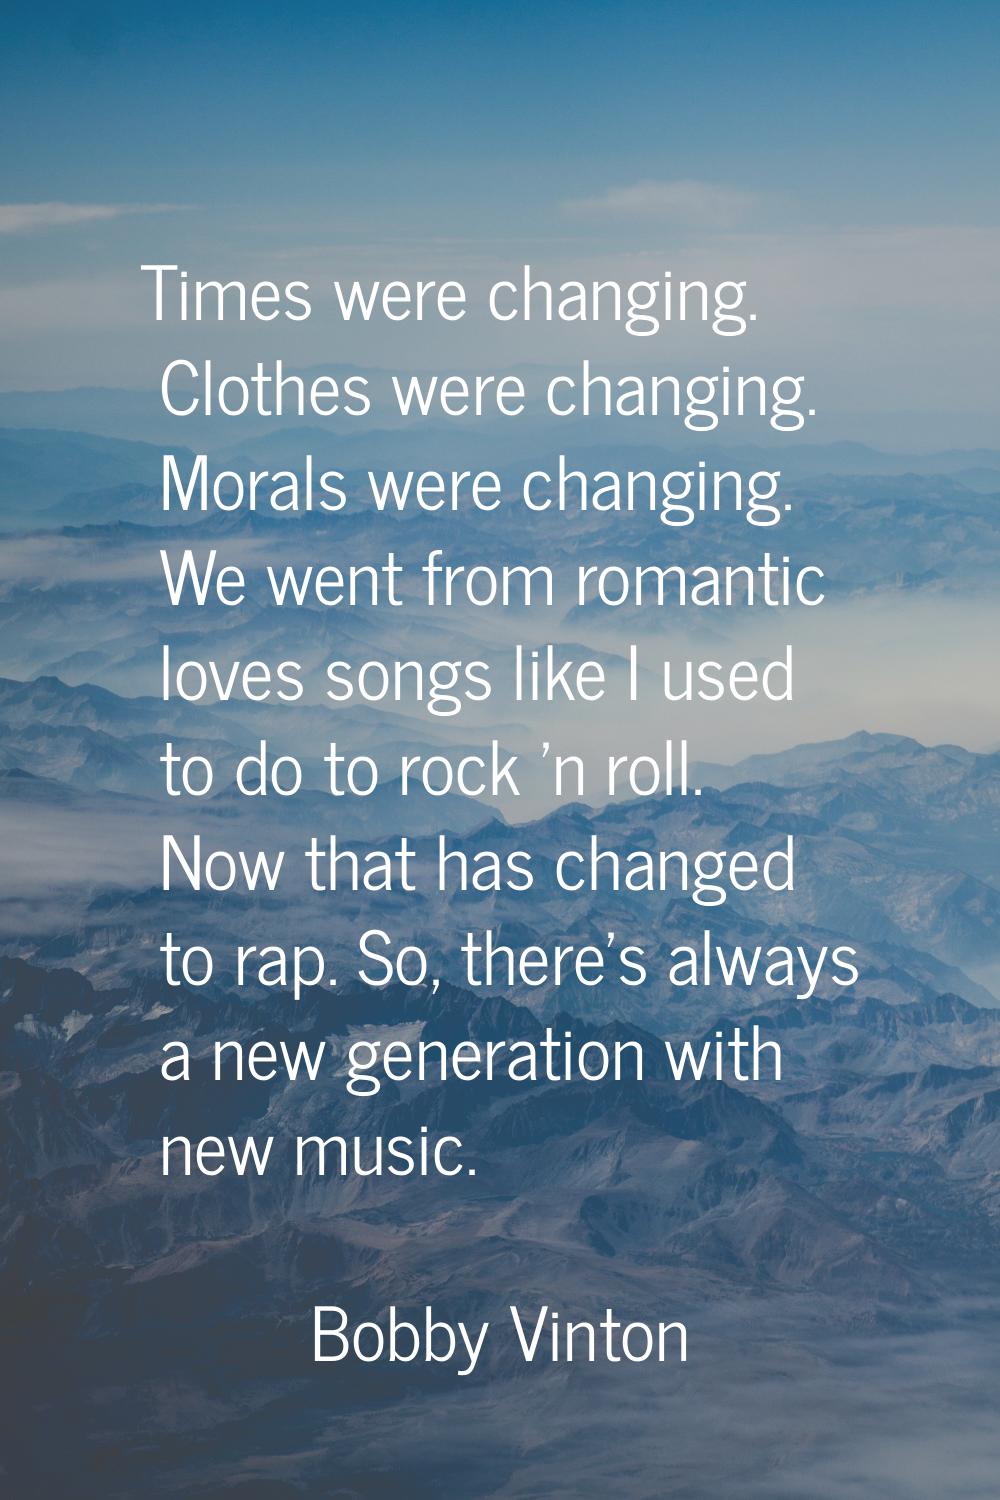 Times were changing. Clothes were changing. Morals were changing. We went from romantic loves songs